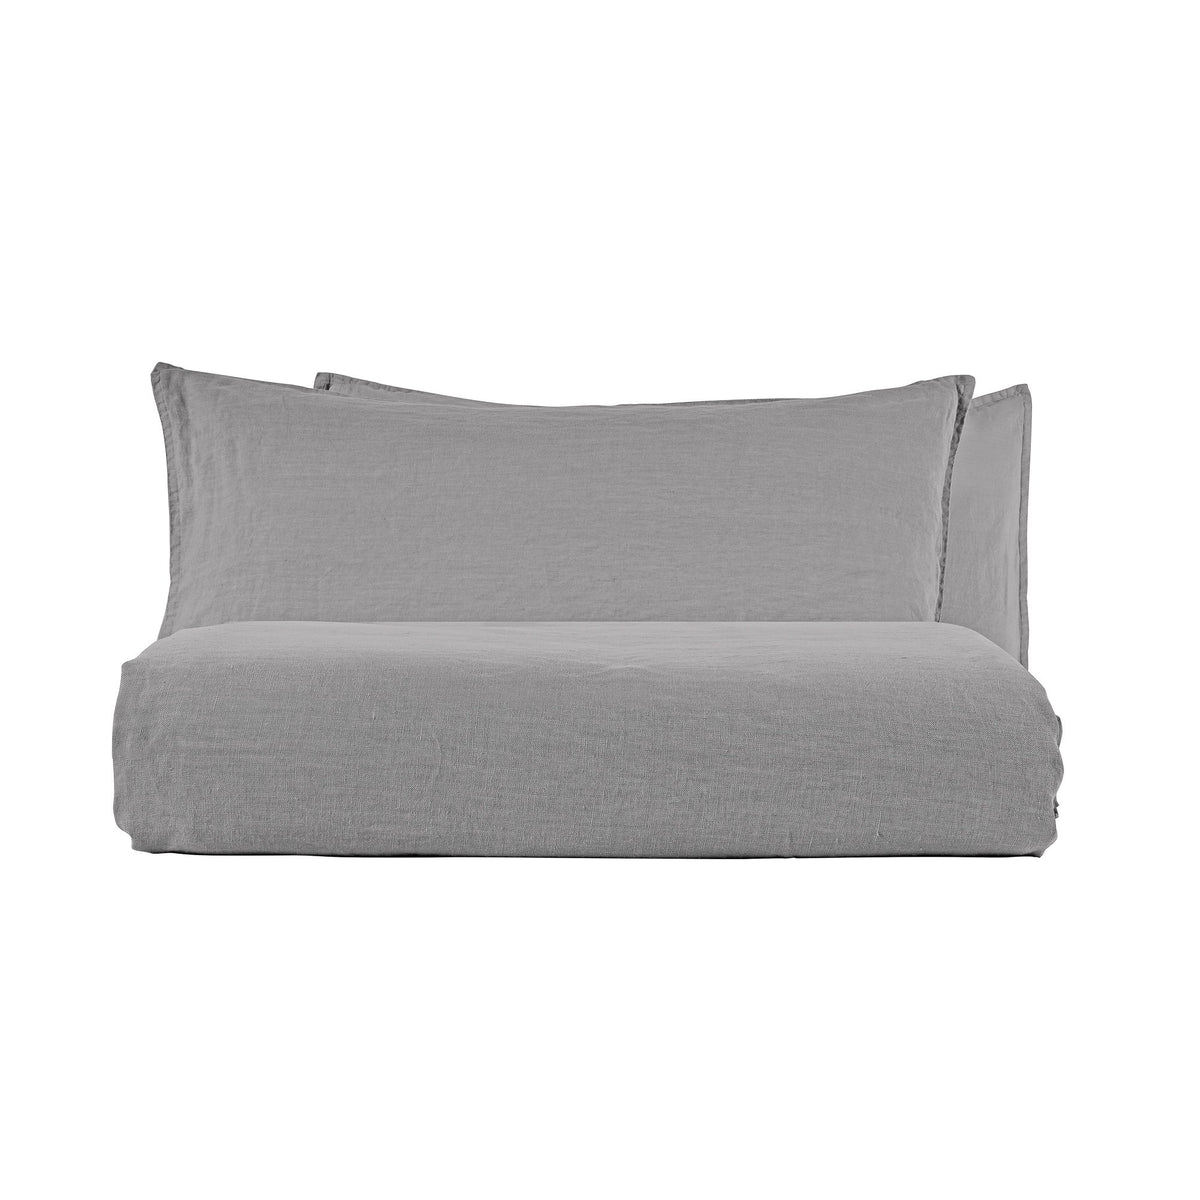 Duvet Cover Set in Stonewashed Linen - Exclusive